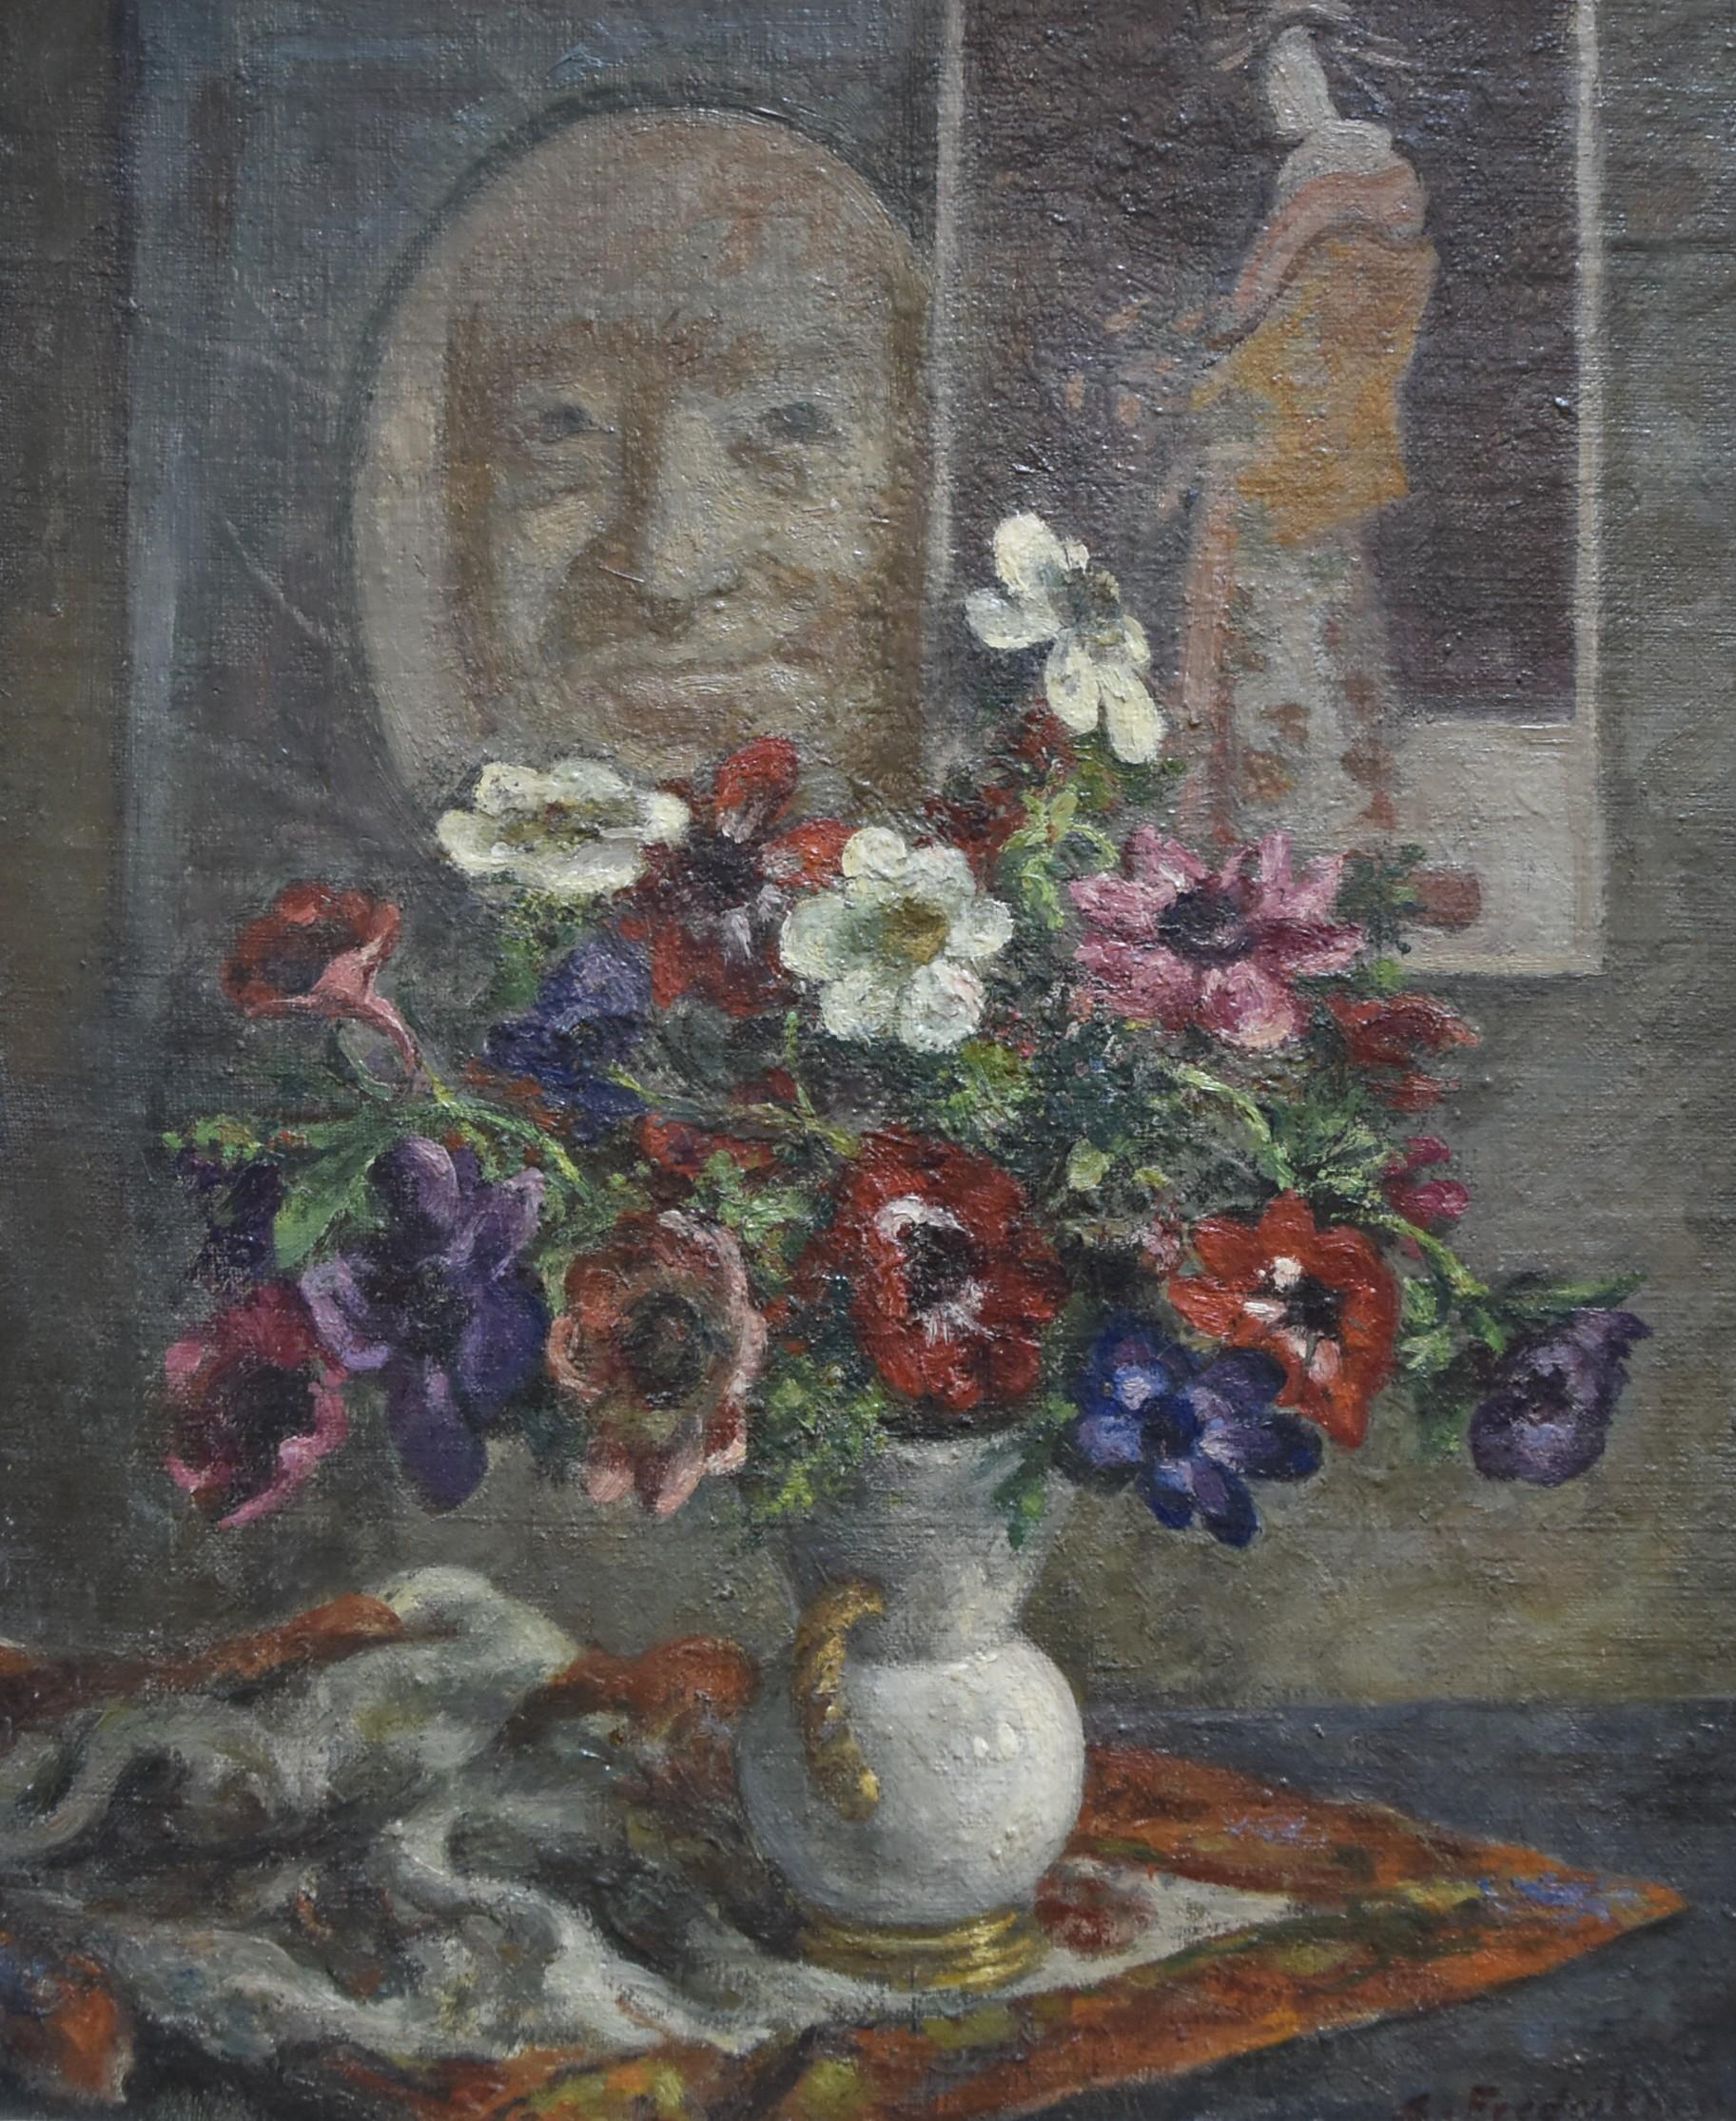 Sigurd Frederiksen (1907-1986) 
A Still-life with a bunch of anemones
oil on canvas, 
signed on the lower right
46 x 38 cm
In good condition, a small indentation on the left in the flowers but barely visible (see photographs, please)
In its original